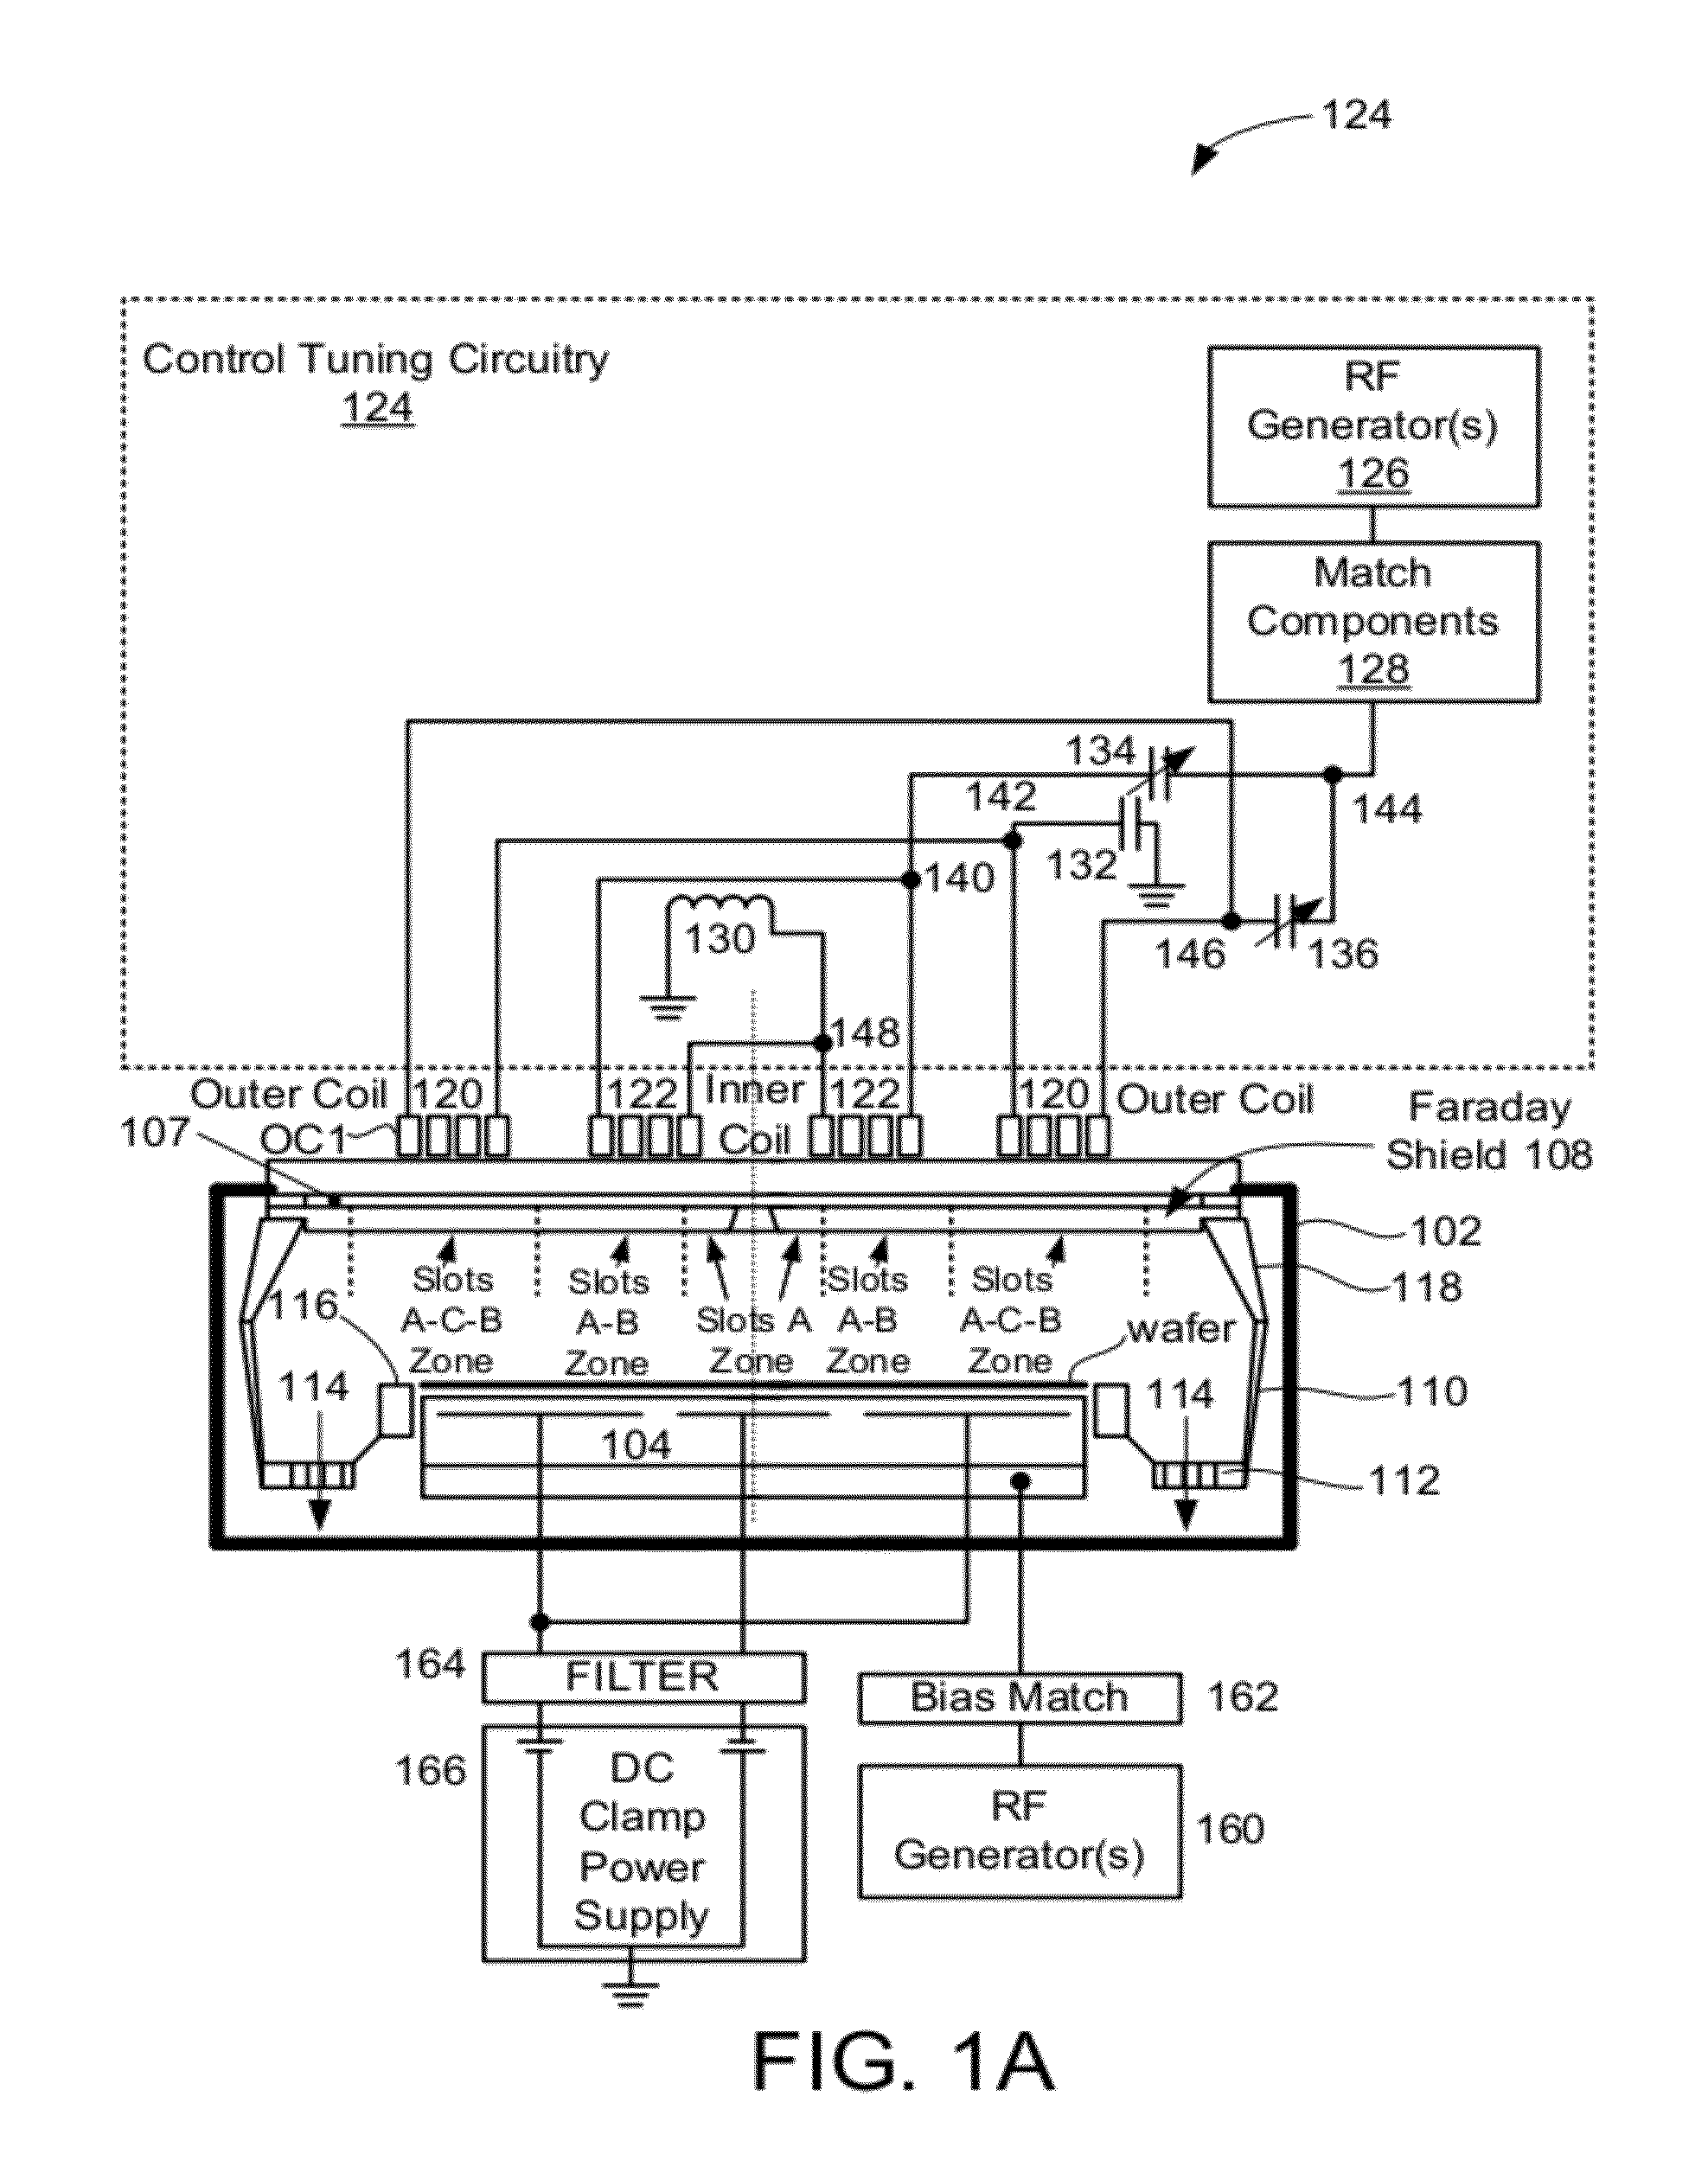 Internal Faraday Shield Having Distributed Chevron Patterns and Correlated Positioning Relative to External Inner and Outer TCP Coil